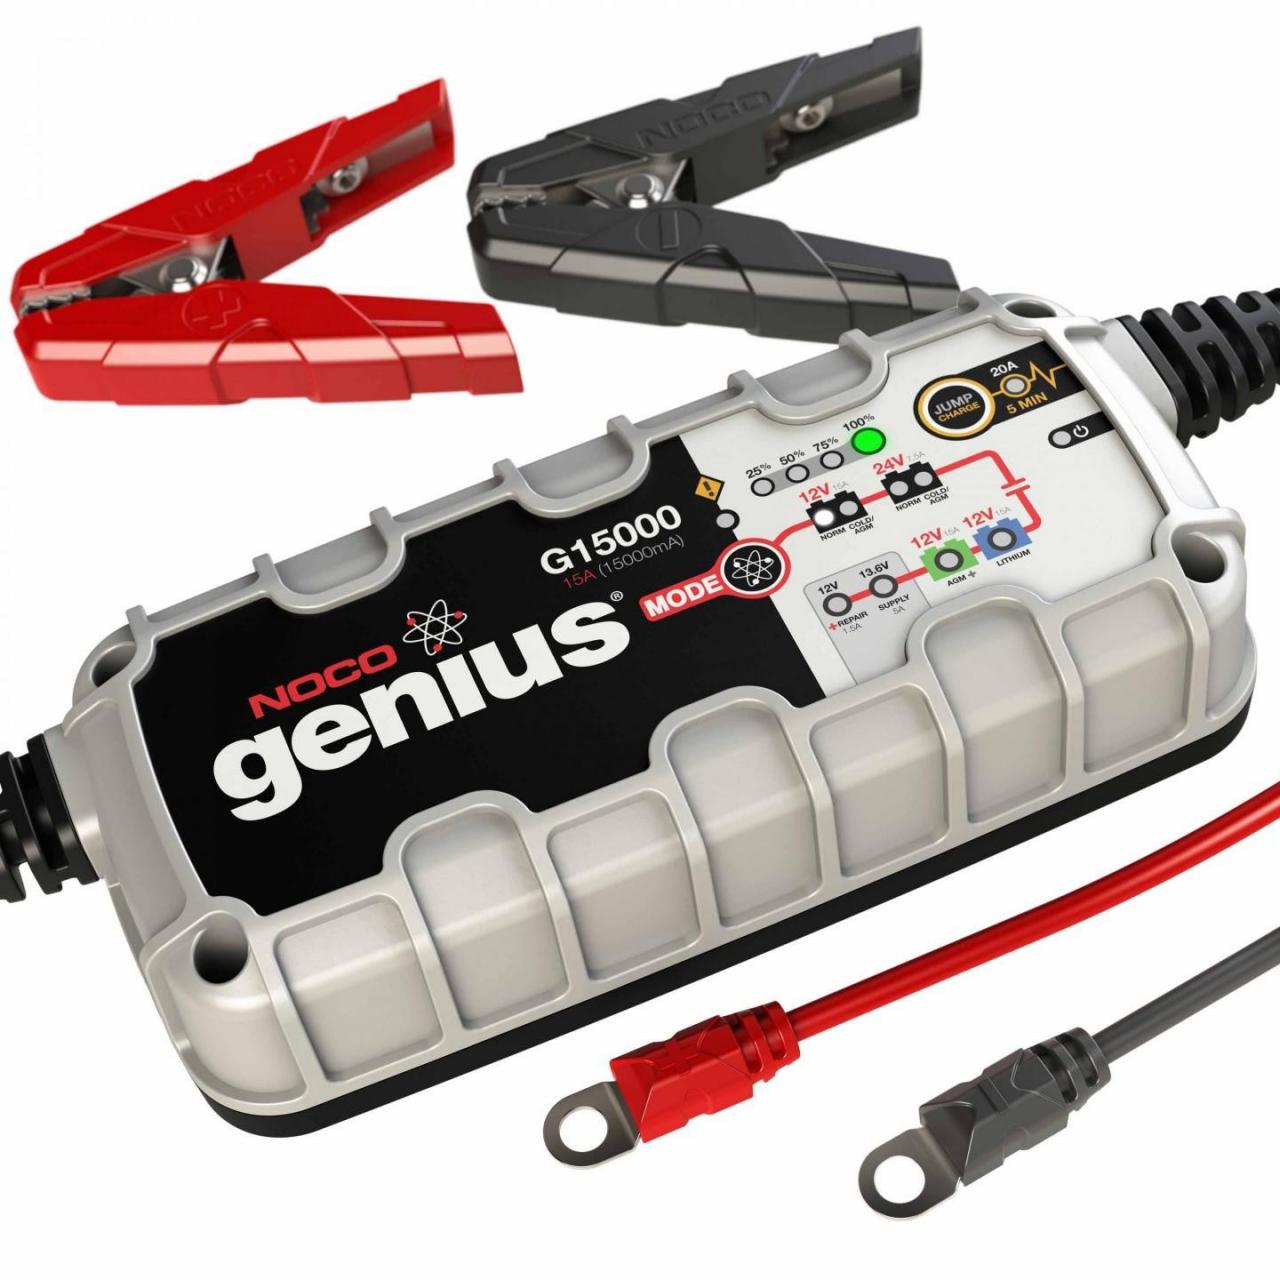 NOCO Genius® G7200 Battery Charger - Charge and Repair a Battery -  Desulfate Car Battery - Batteries Online